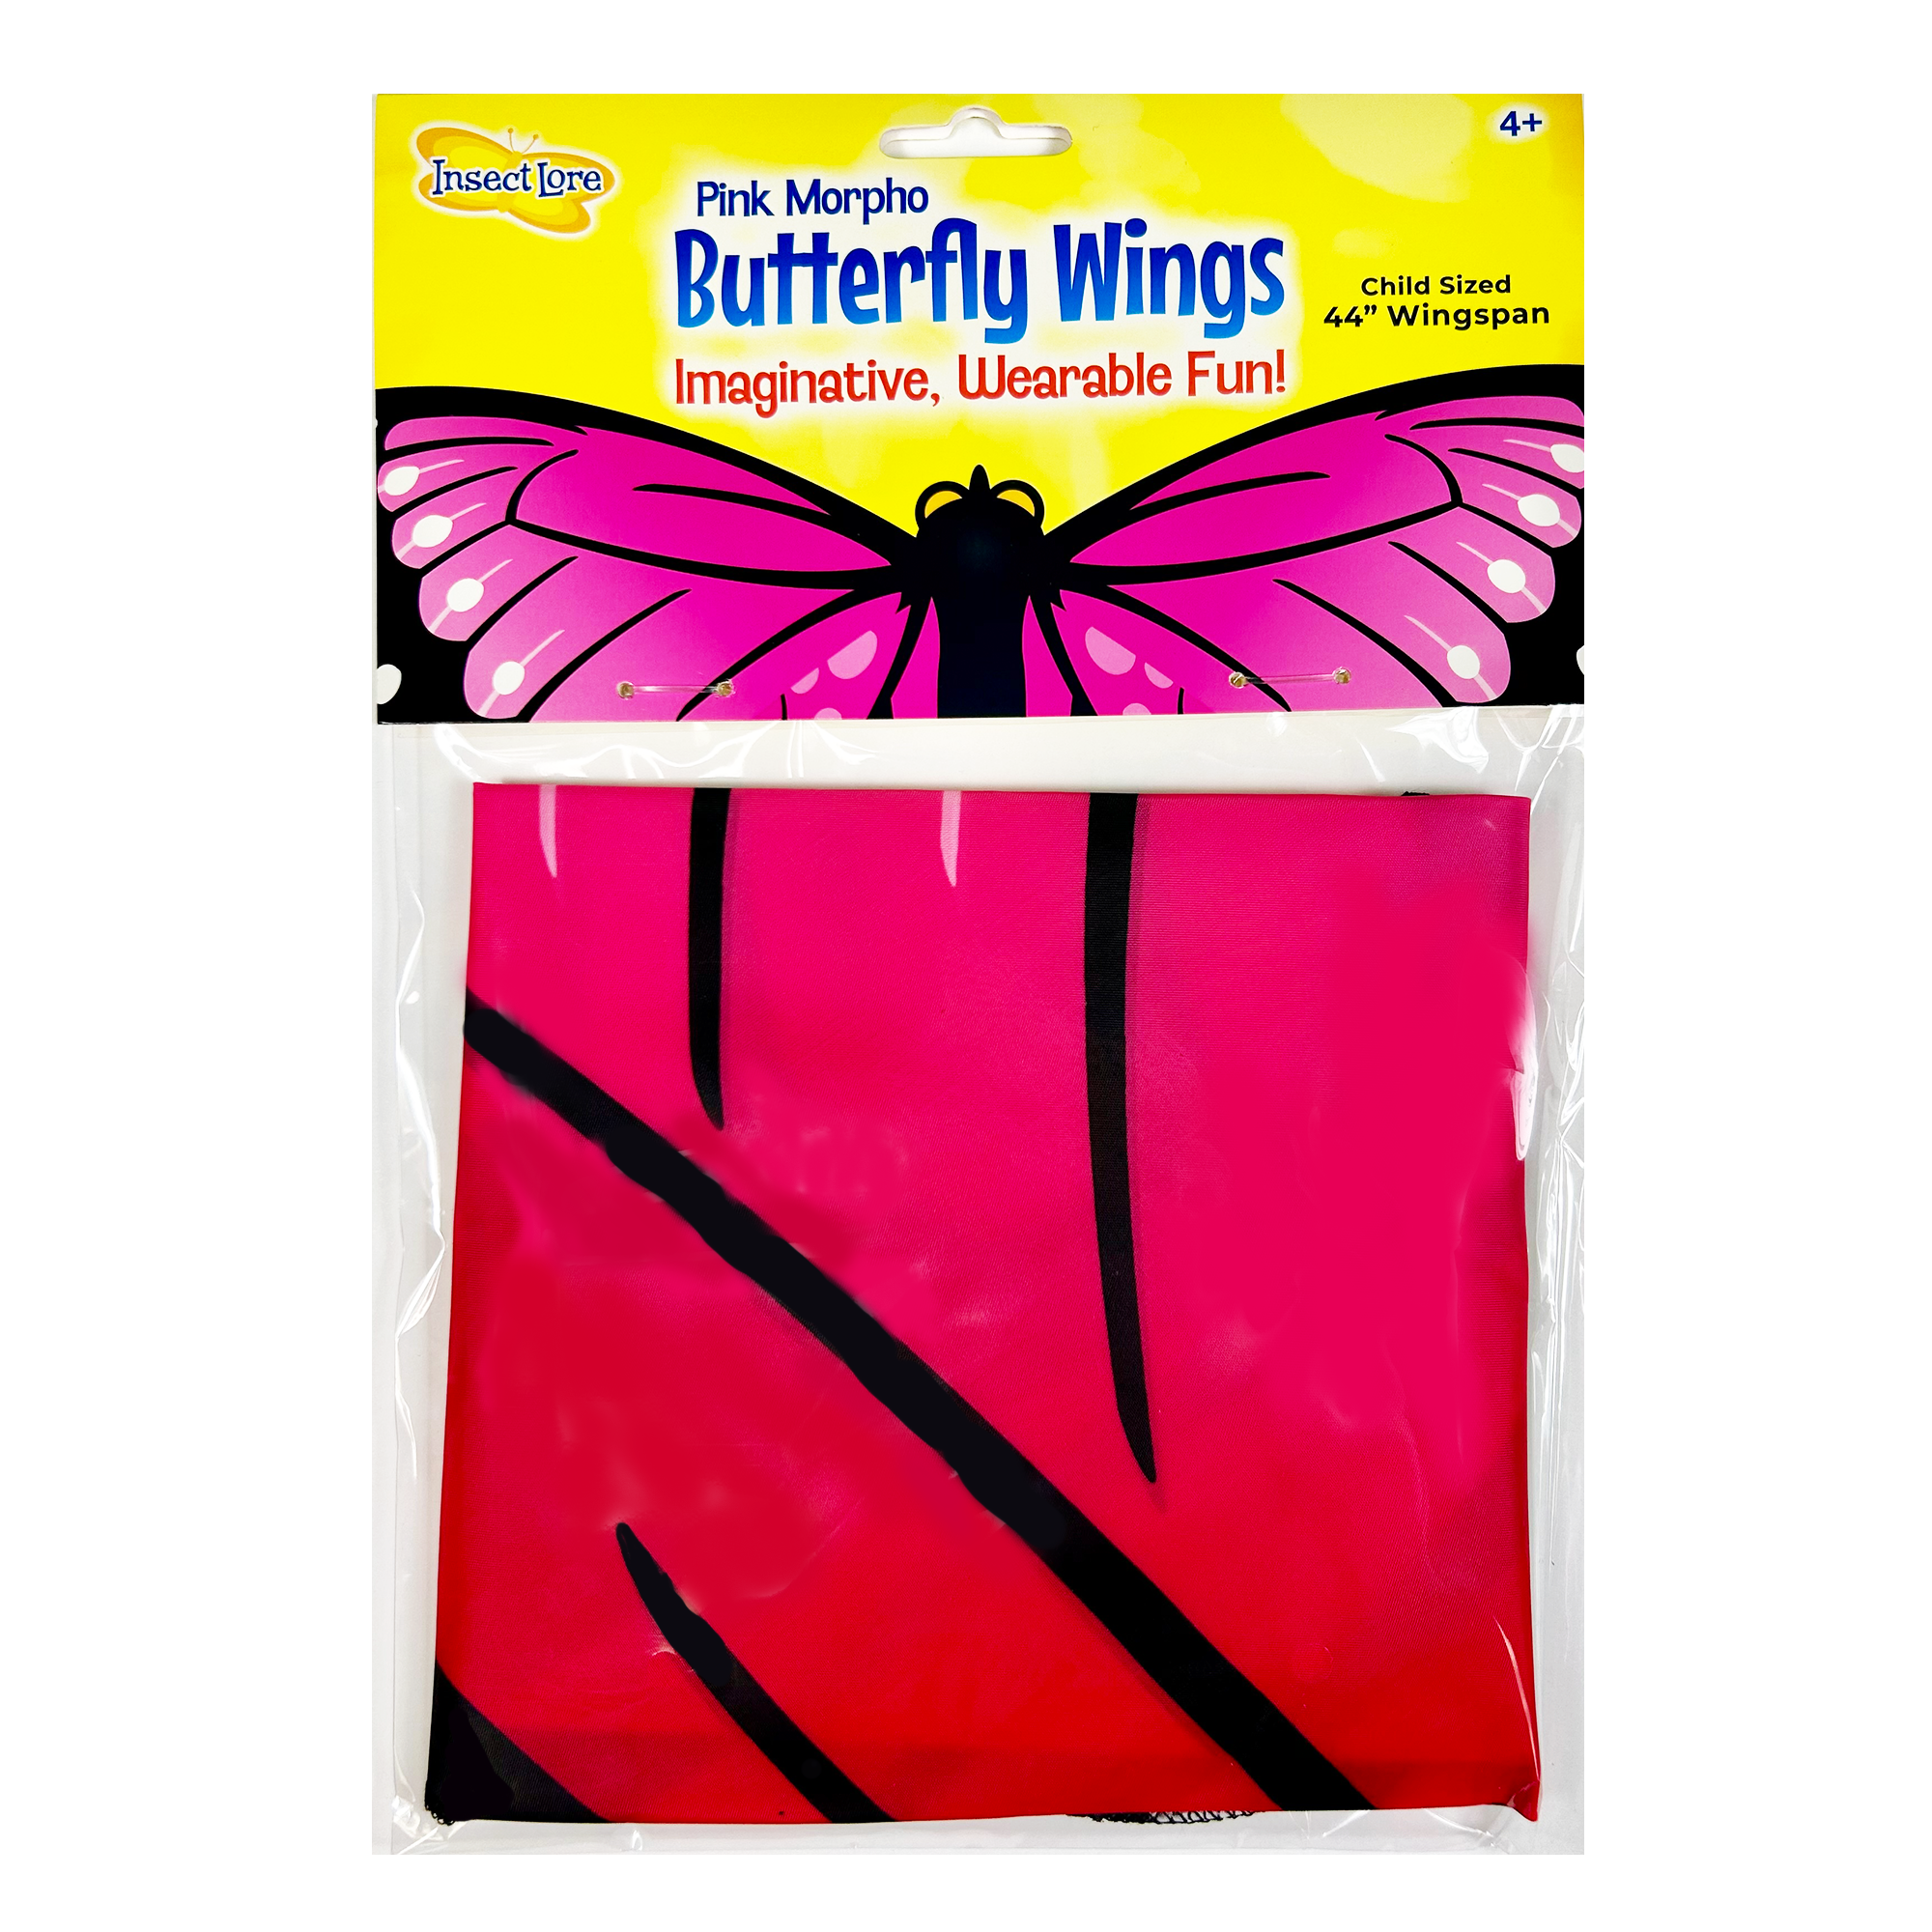 Dress Up Pink Morpho Butterfly Wings - Special Offer!